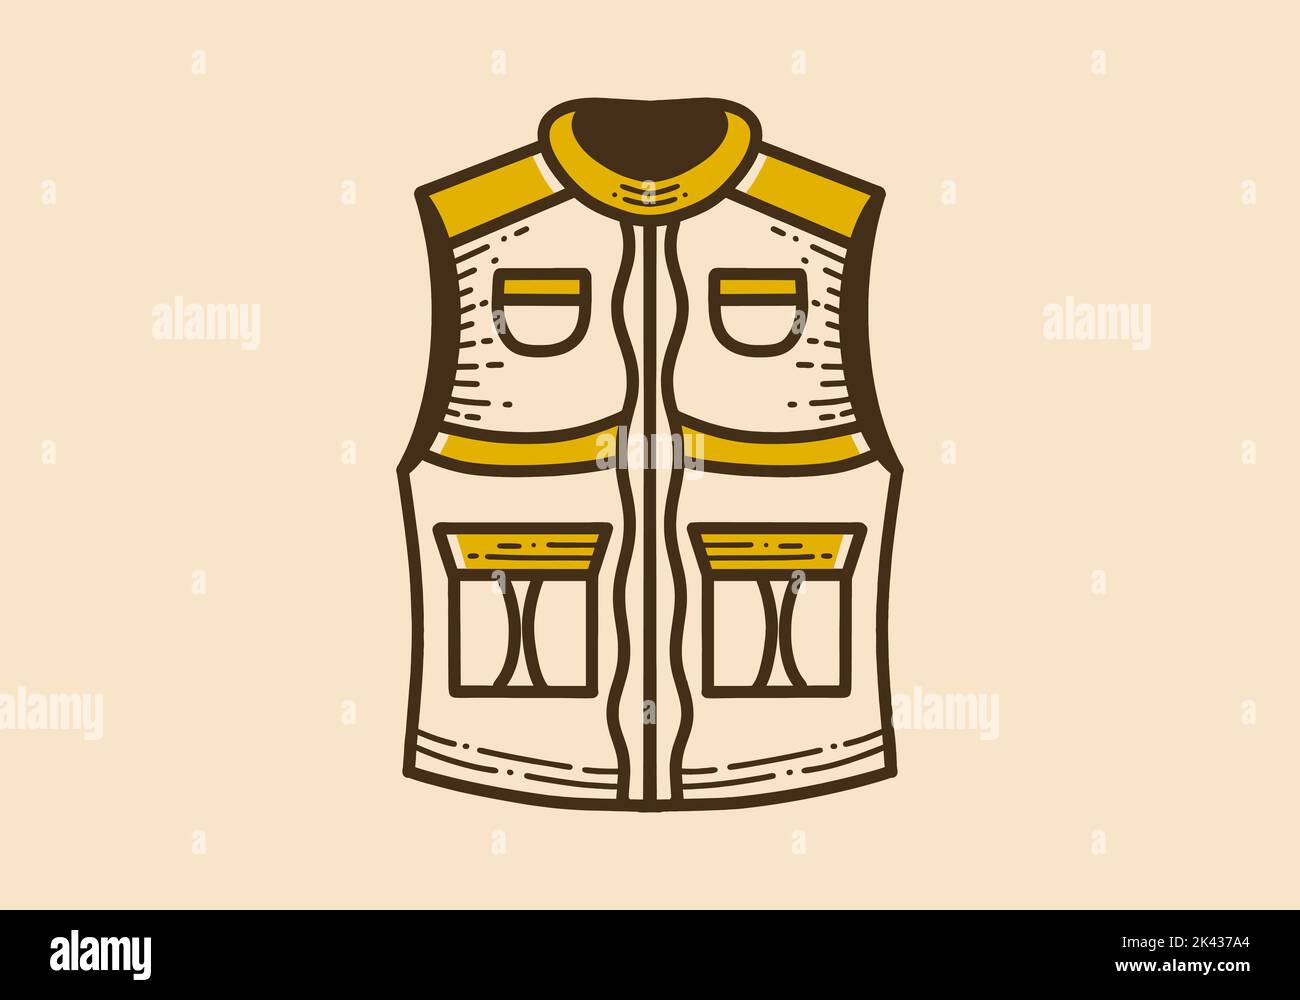 Retro vintage art illustration of a vest with many pockets Stock Vector